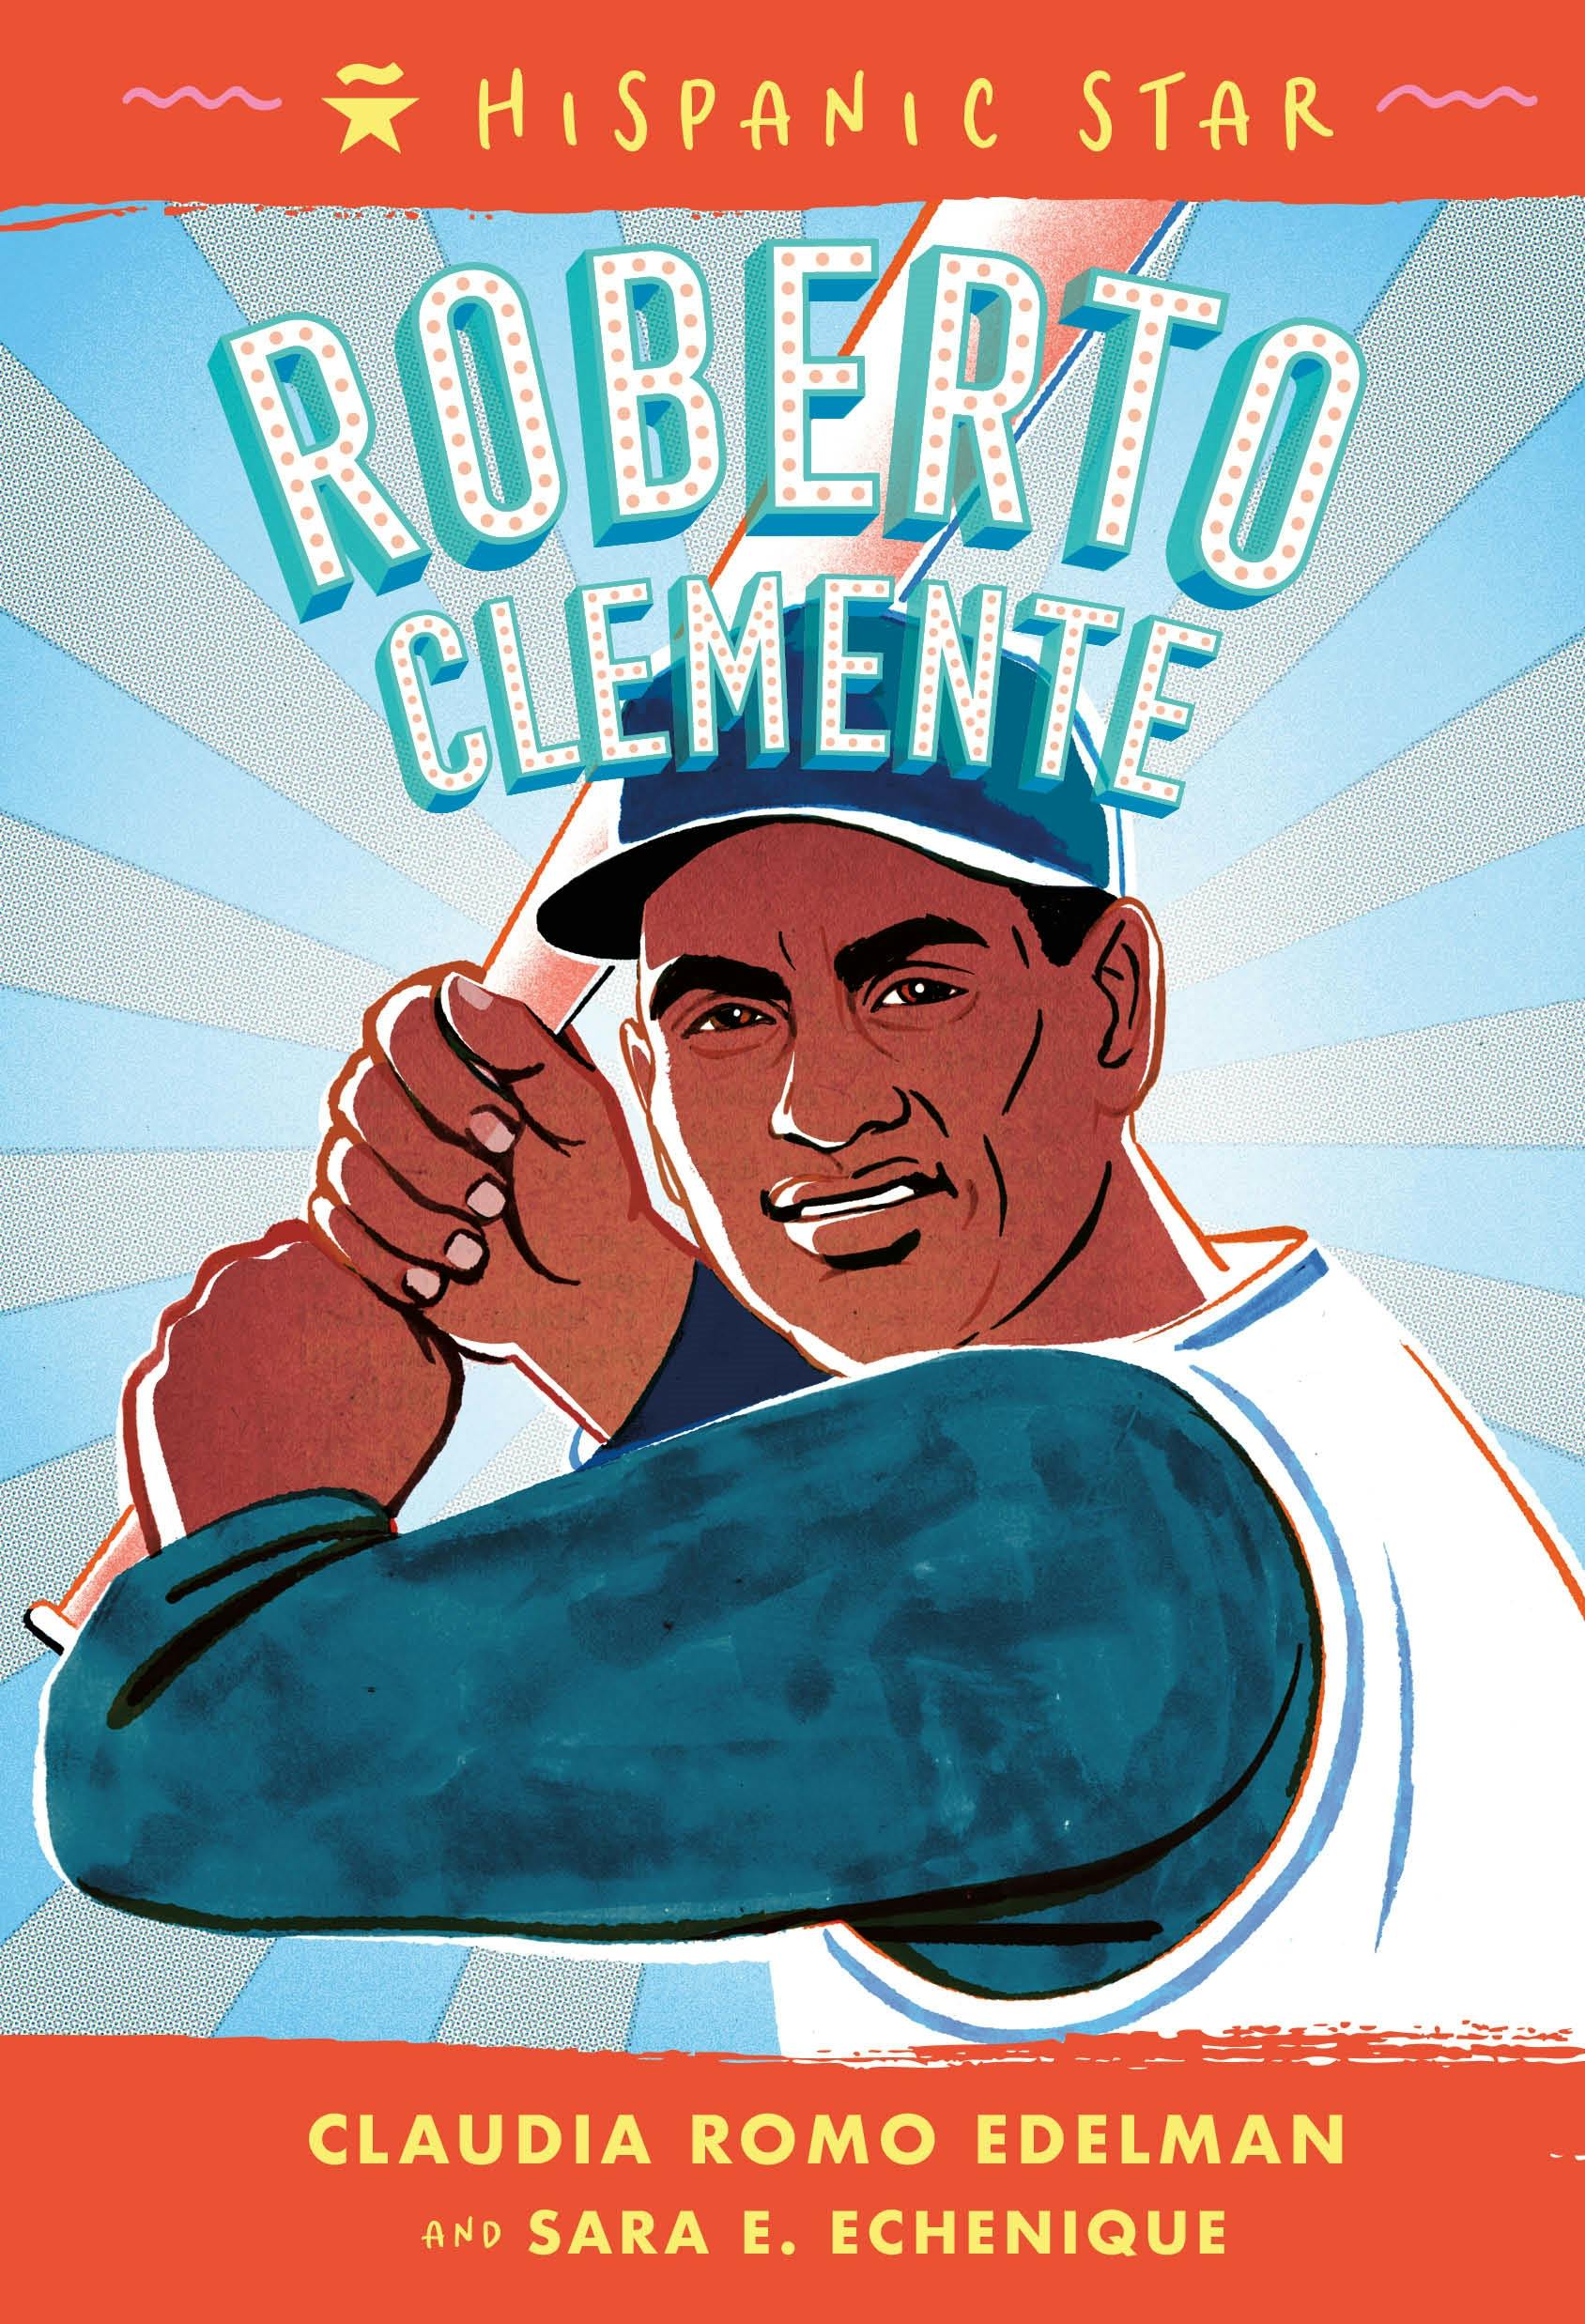 AMERICAN EXPERIENCE: Roberto Clemente